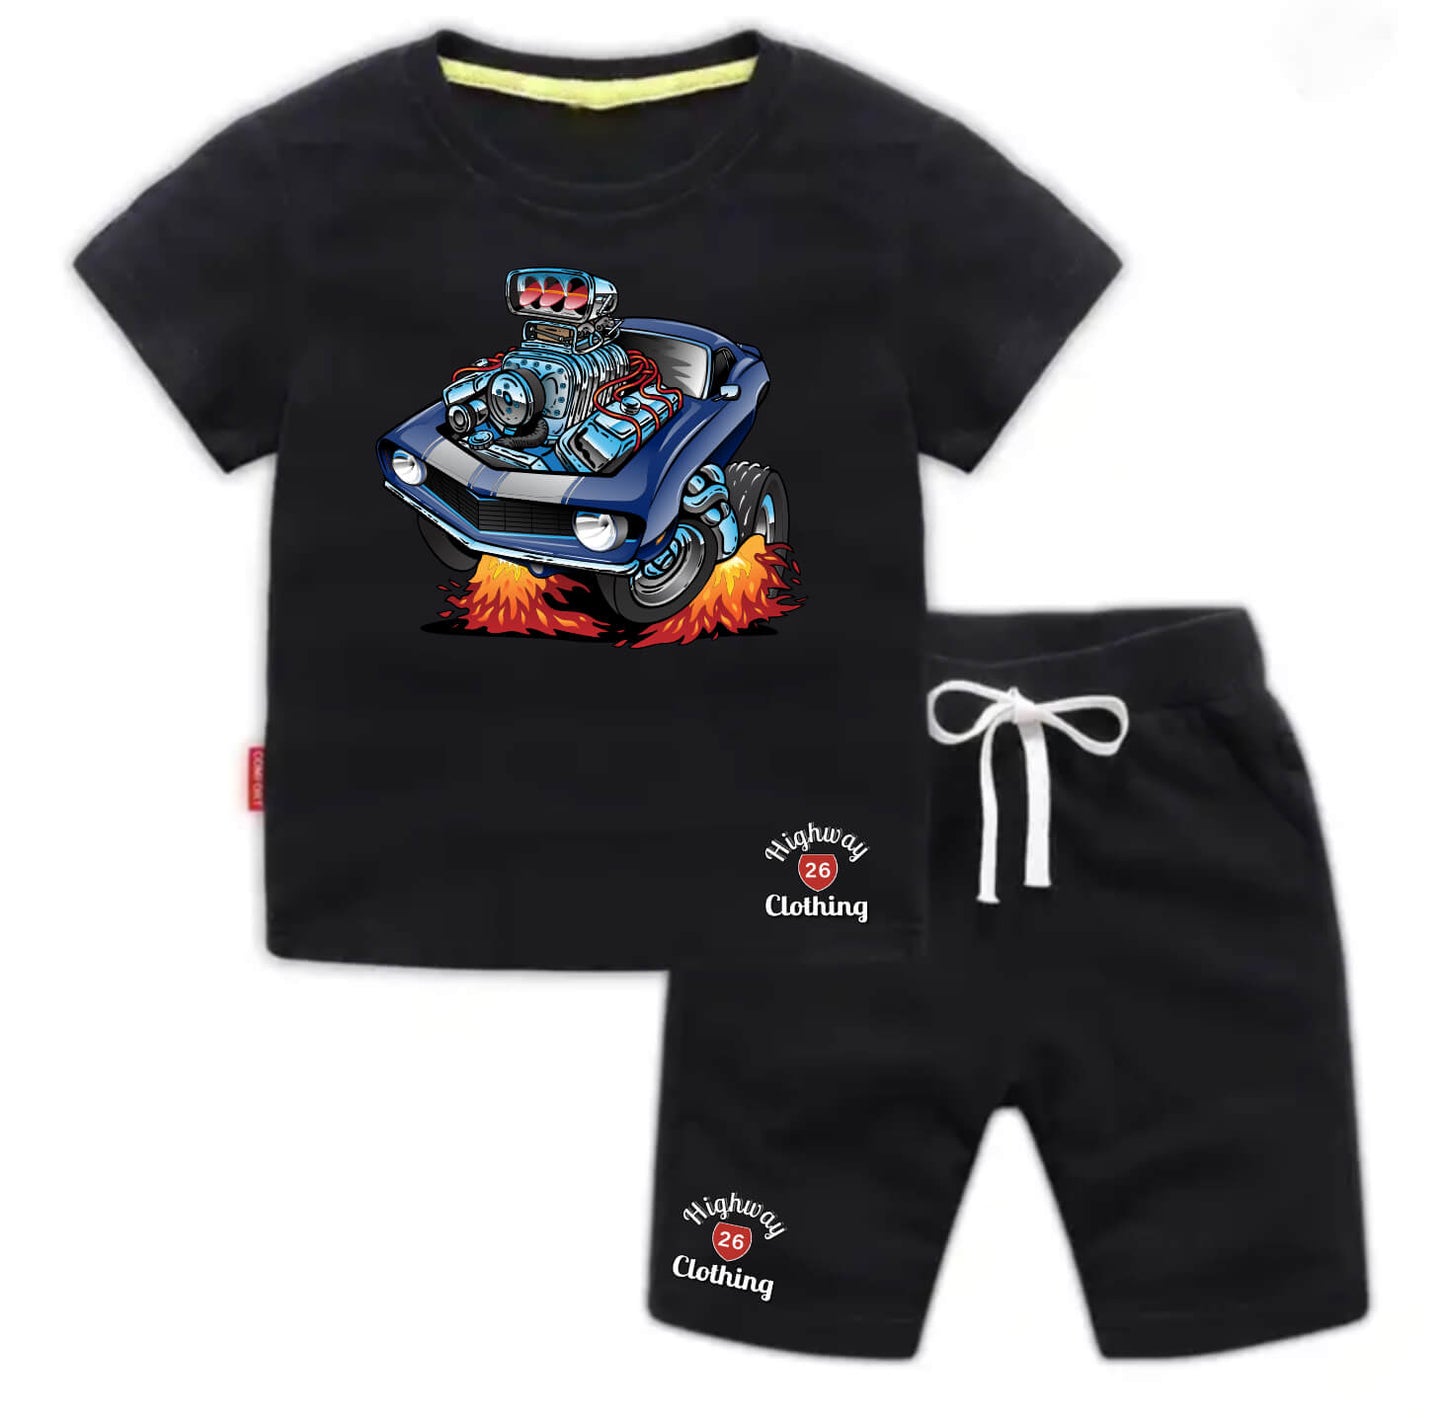 Chevy t-shirt and short set - black - Highway 26 Clothing